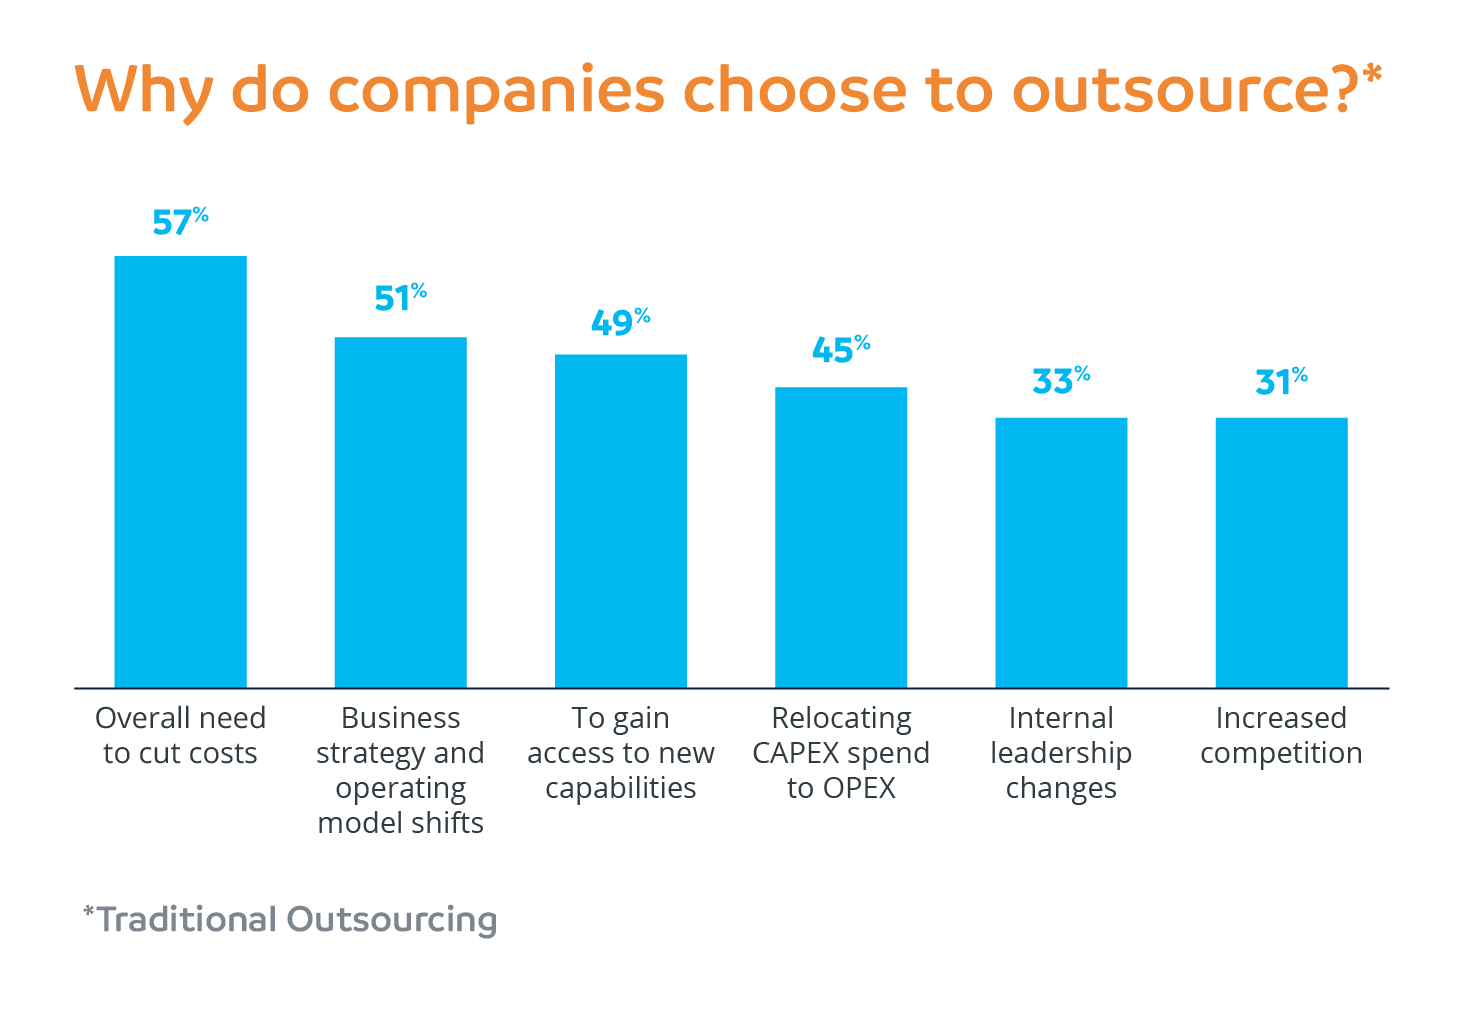 Why do companies choose to outsource